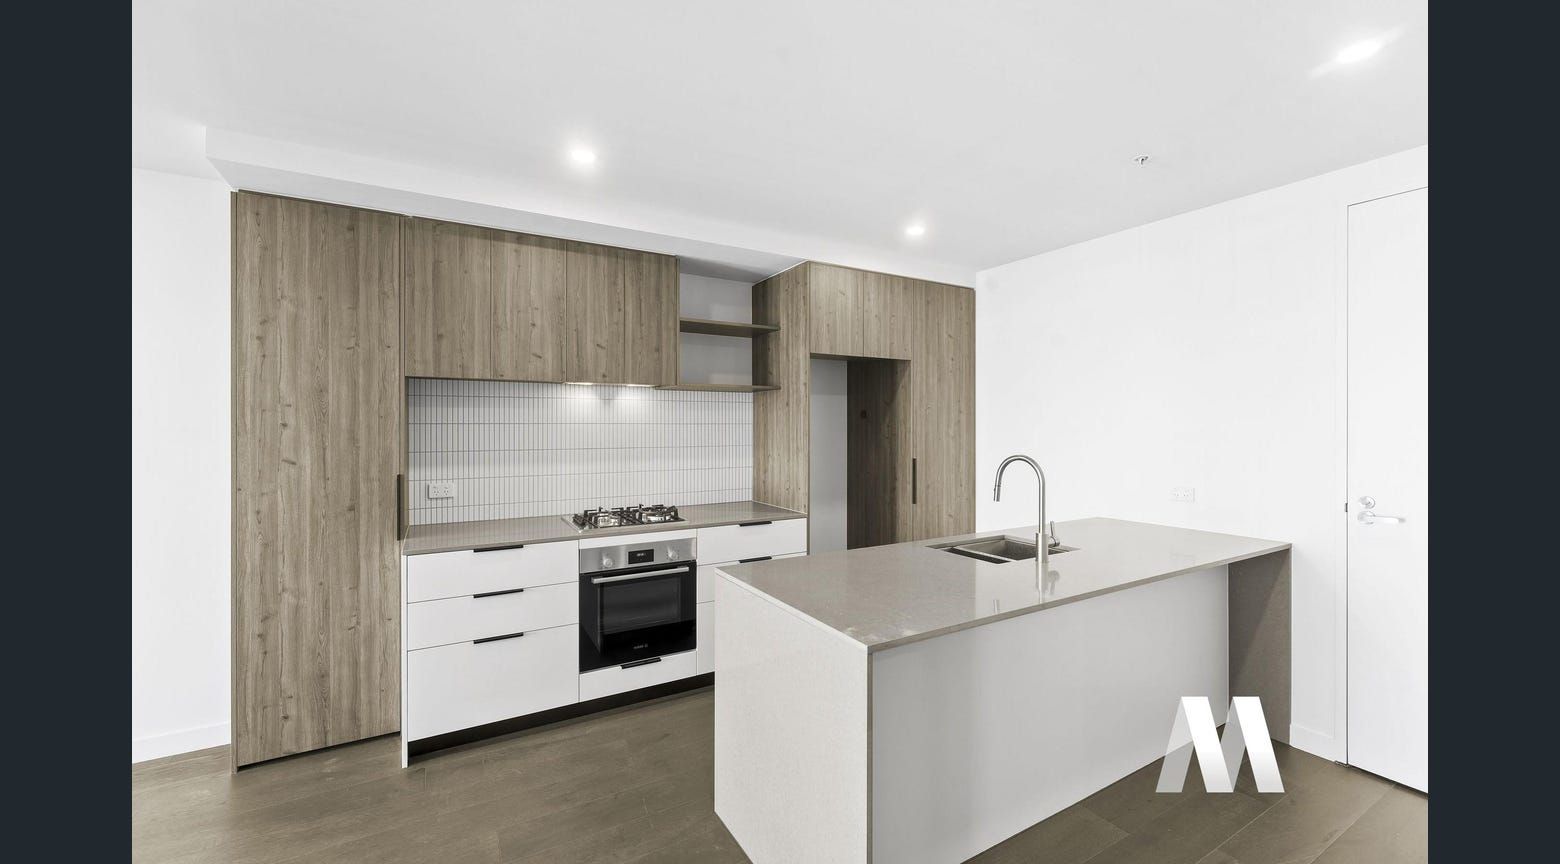 2 bedrooms Apartment / Unit / Flat in 112/2A Duffy Street ESSENDON NORTH VIC, 3041